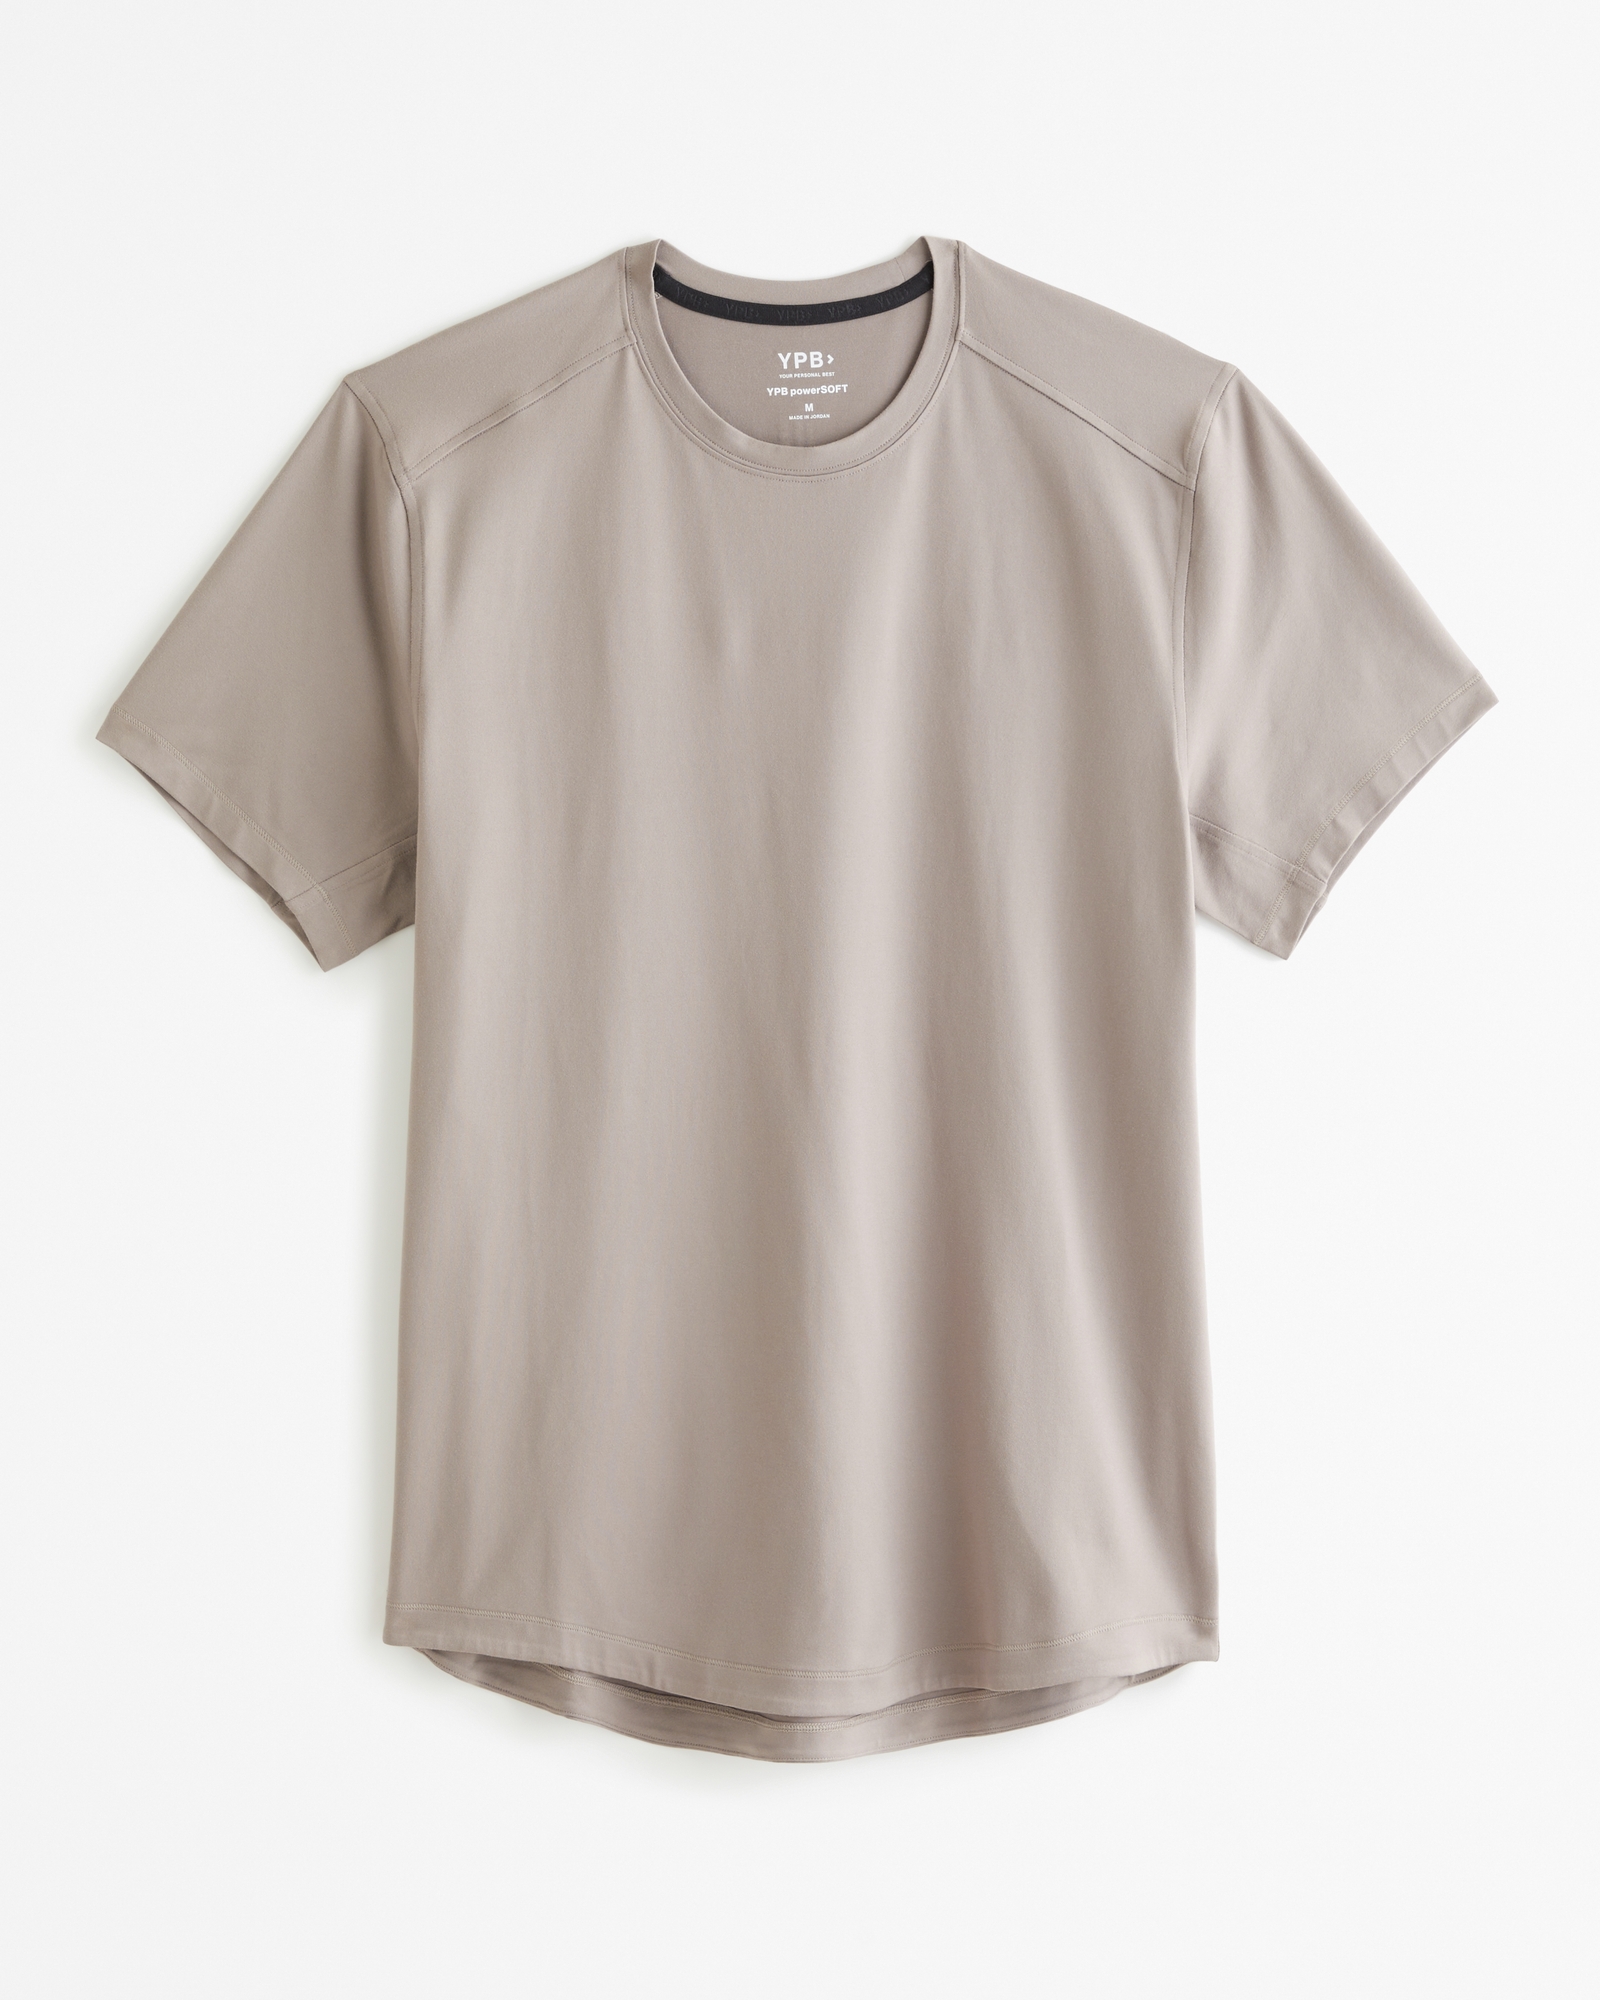 Homme YPB powerSOFT Lifting Tee, Homme Hauts